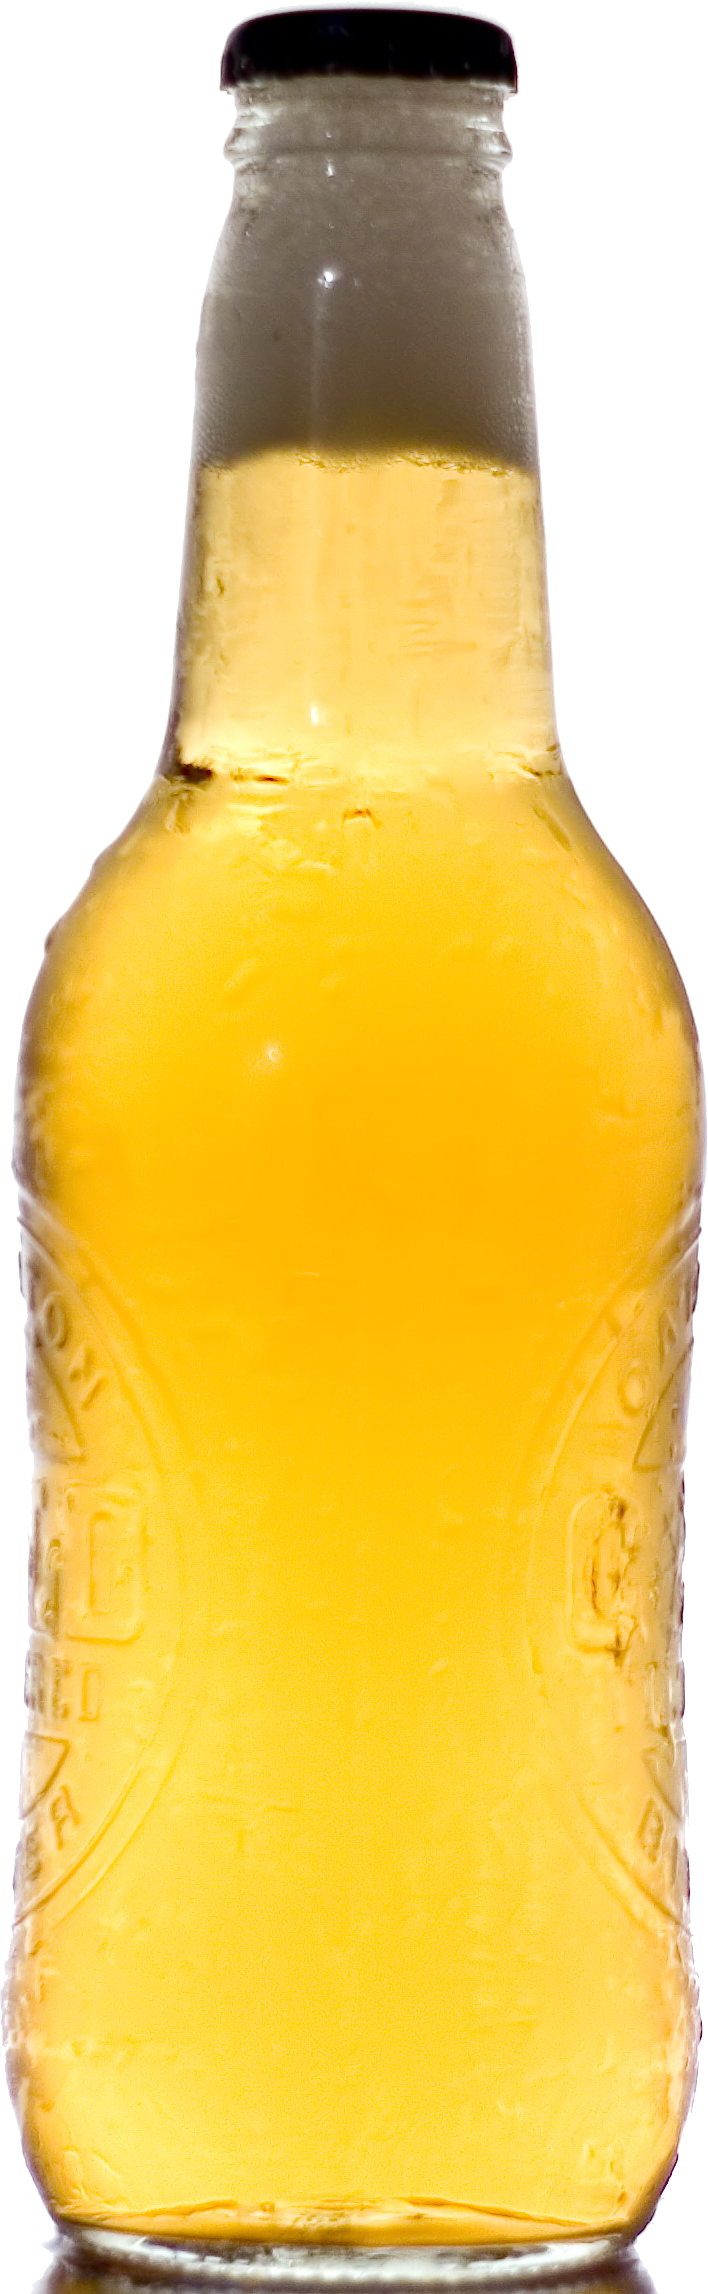 Beer PNG HD Quality